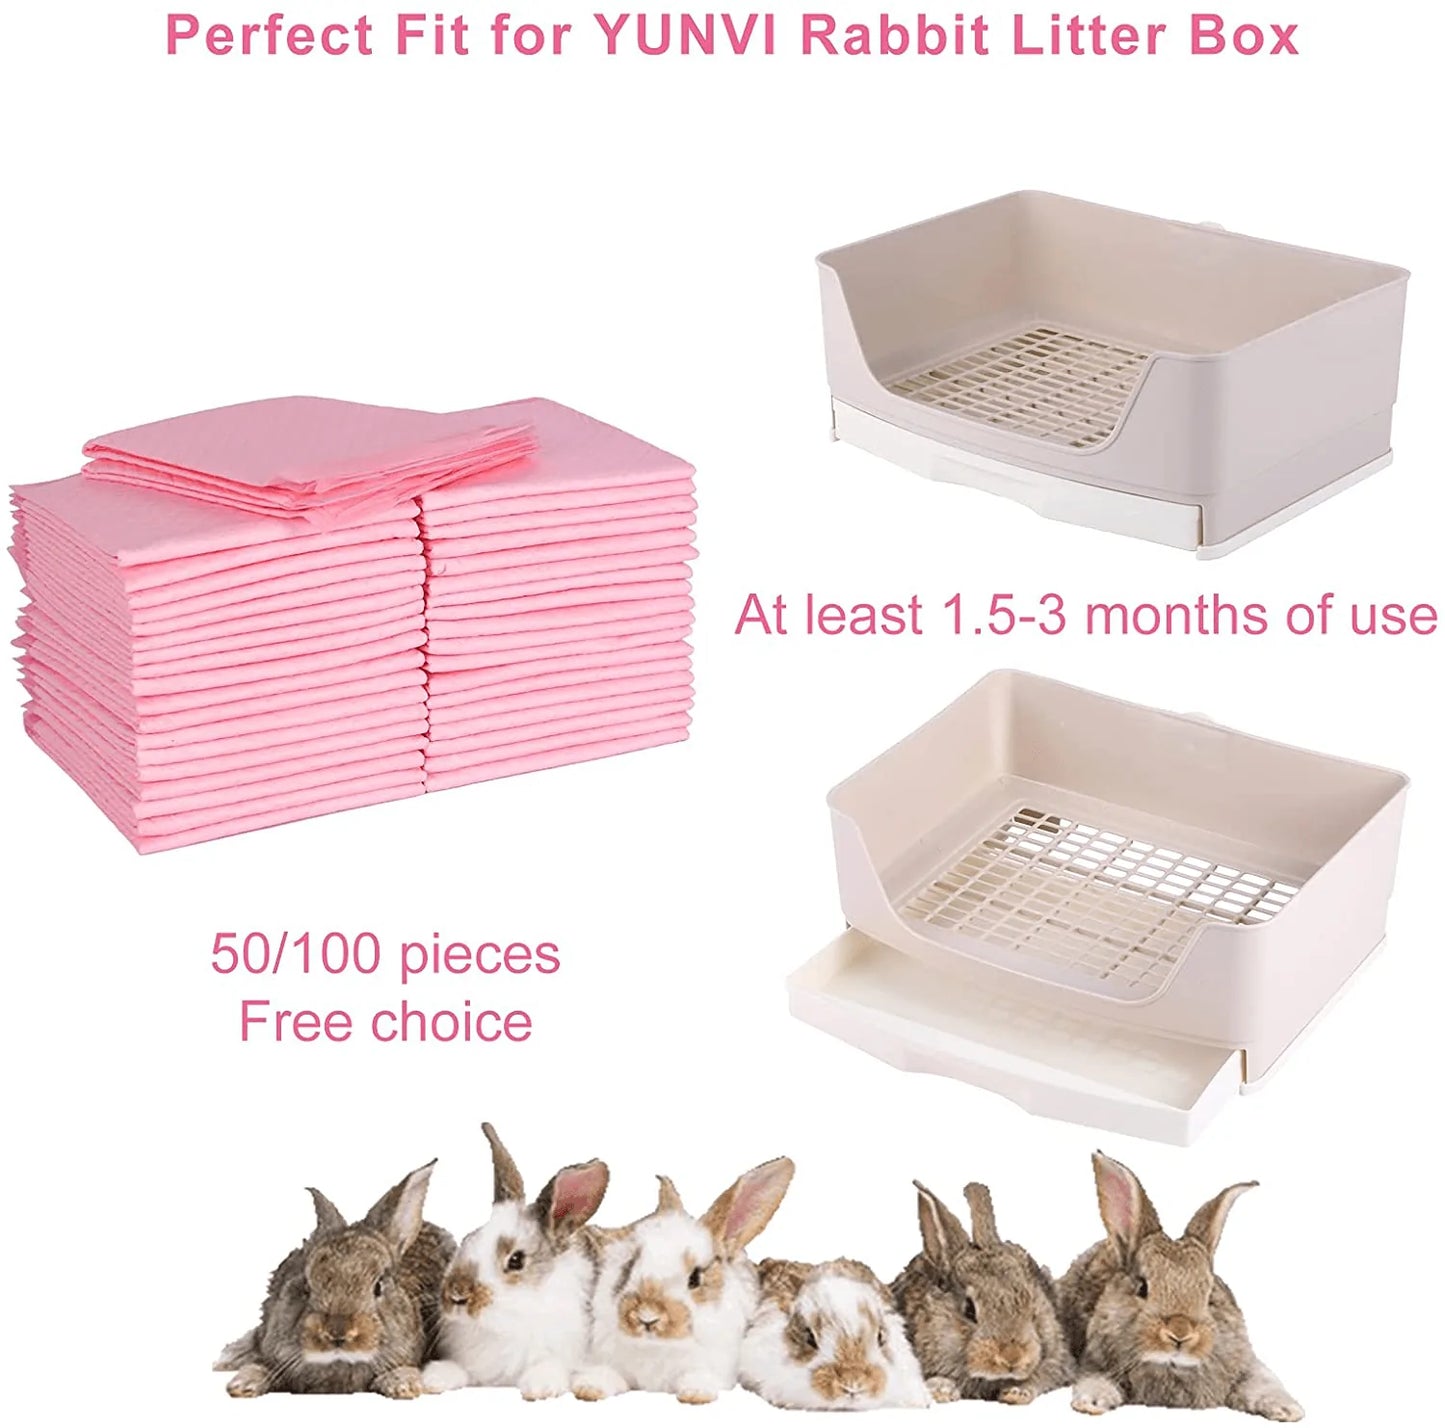 （50/100Pcs）Super Absorbent Rabbit Pee Pads, Disposable Bunny Litter Training Pad Thicken Guinea Pig Cage Liner Small Animal Diaper Pet Cage Accessory for Cat Hamster Reptile Chinchilla Hedgehog